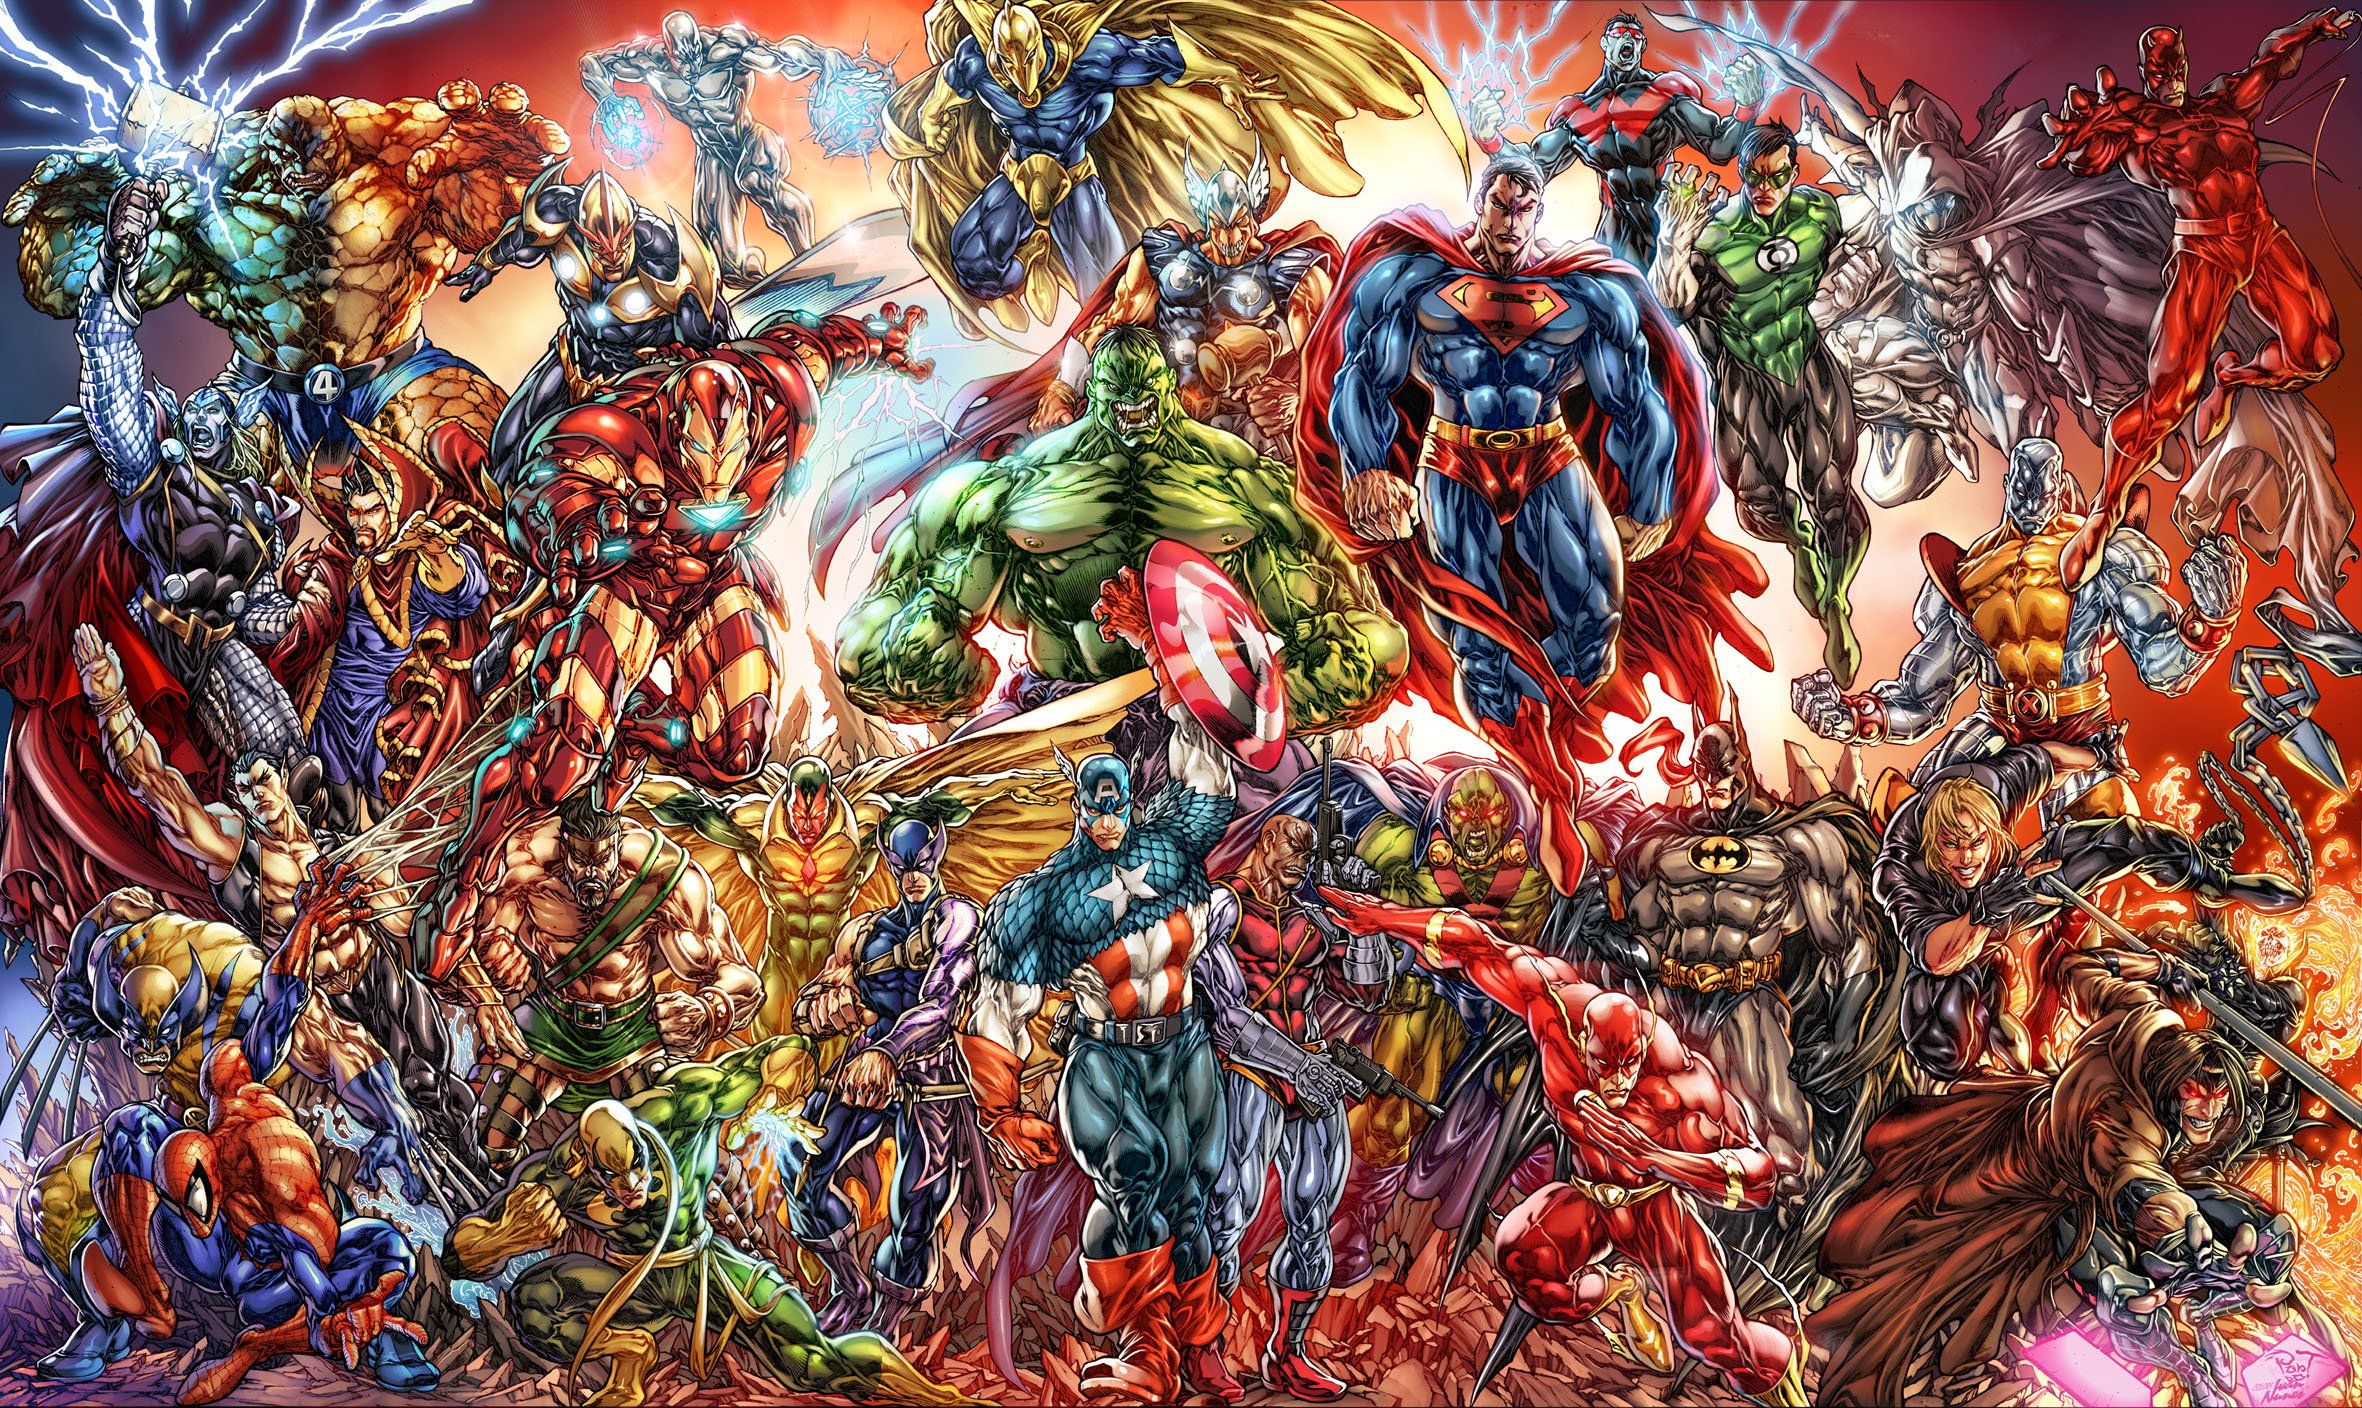 All superheroes and supervillains of the DC and Marvel universe. - Marvel